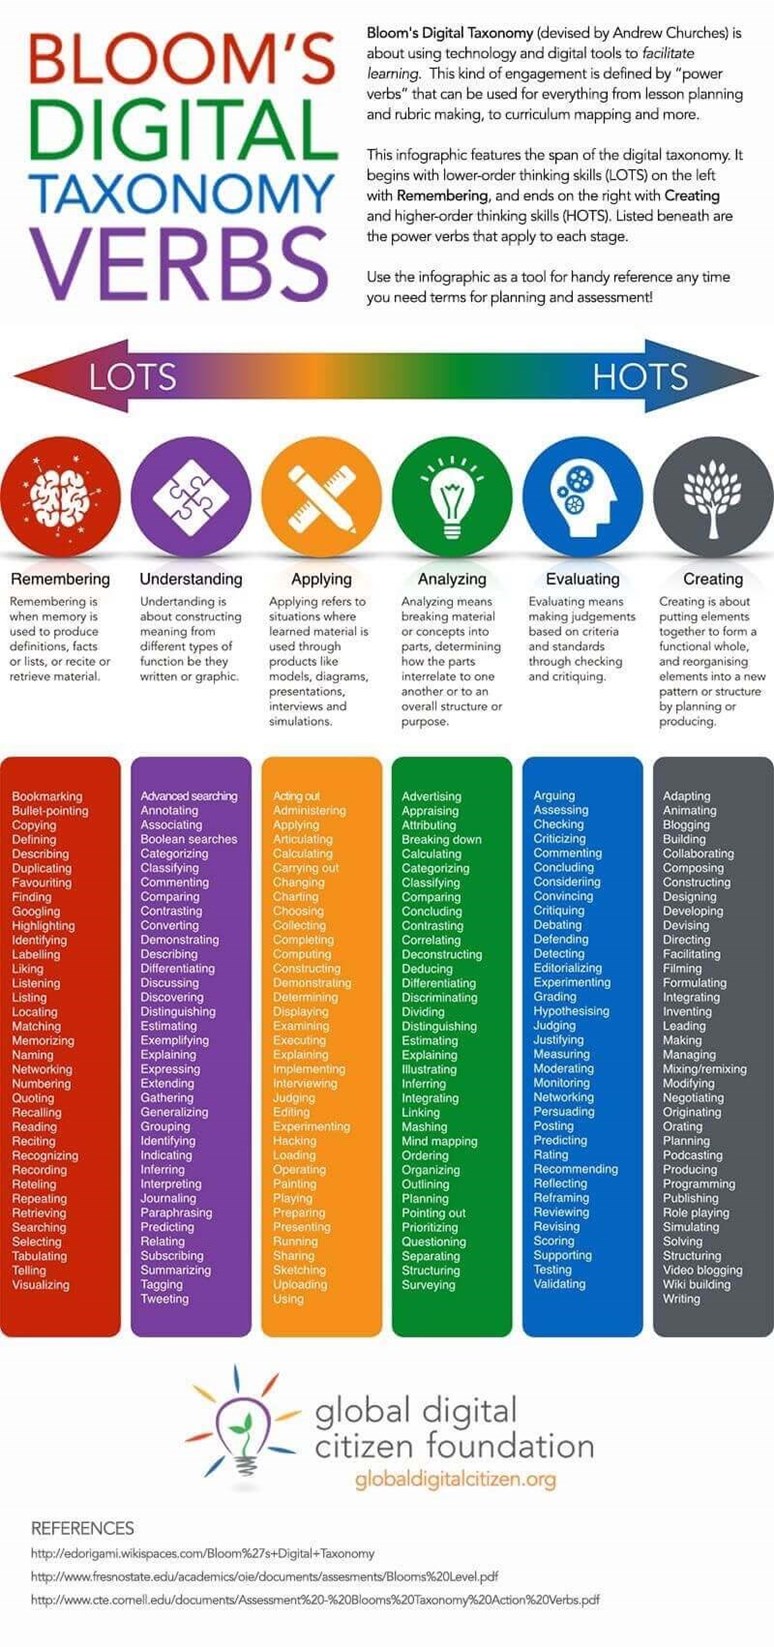 Zdroj: https://www.teachthought.com/critical-thinking/blooms-digital-taxonomy-verbs/